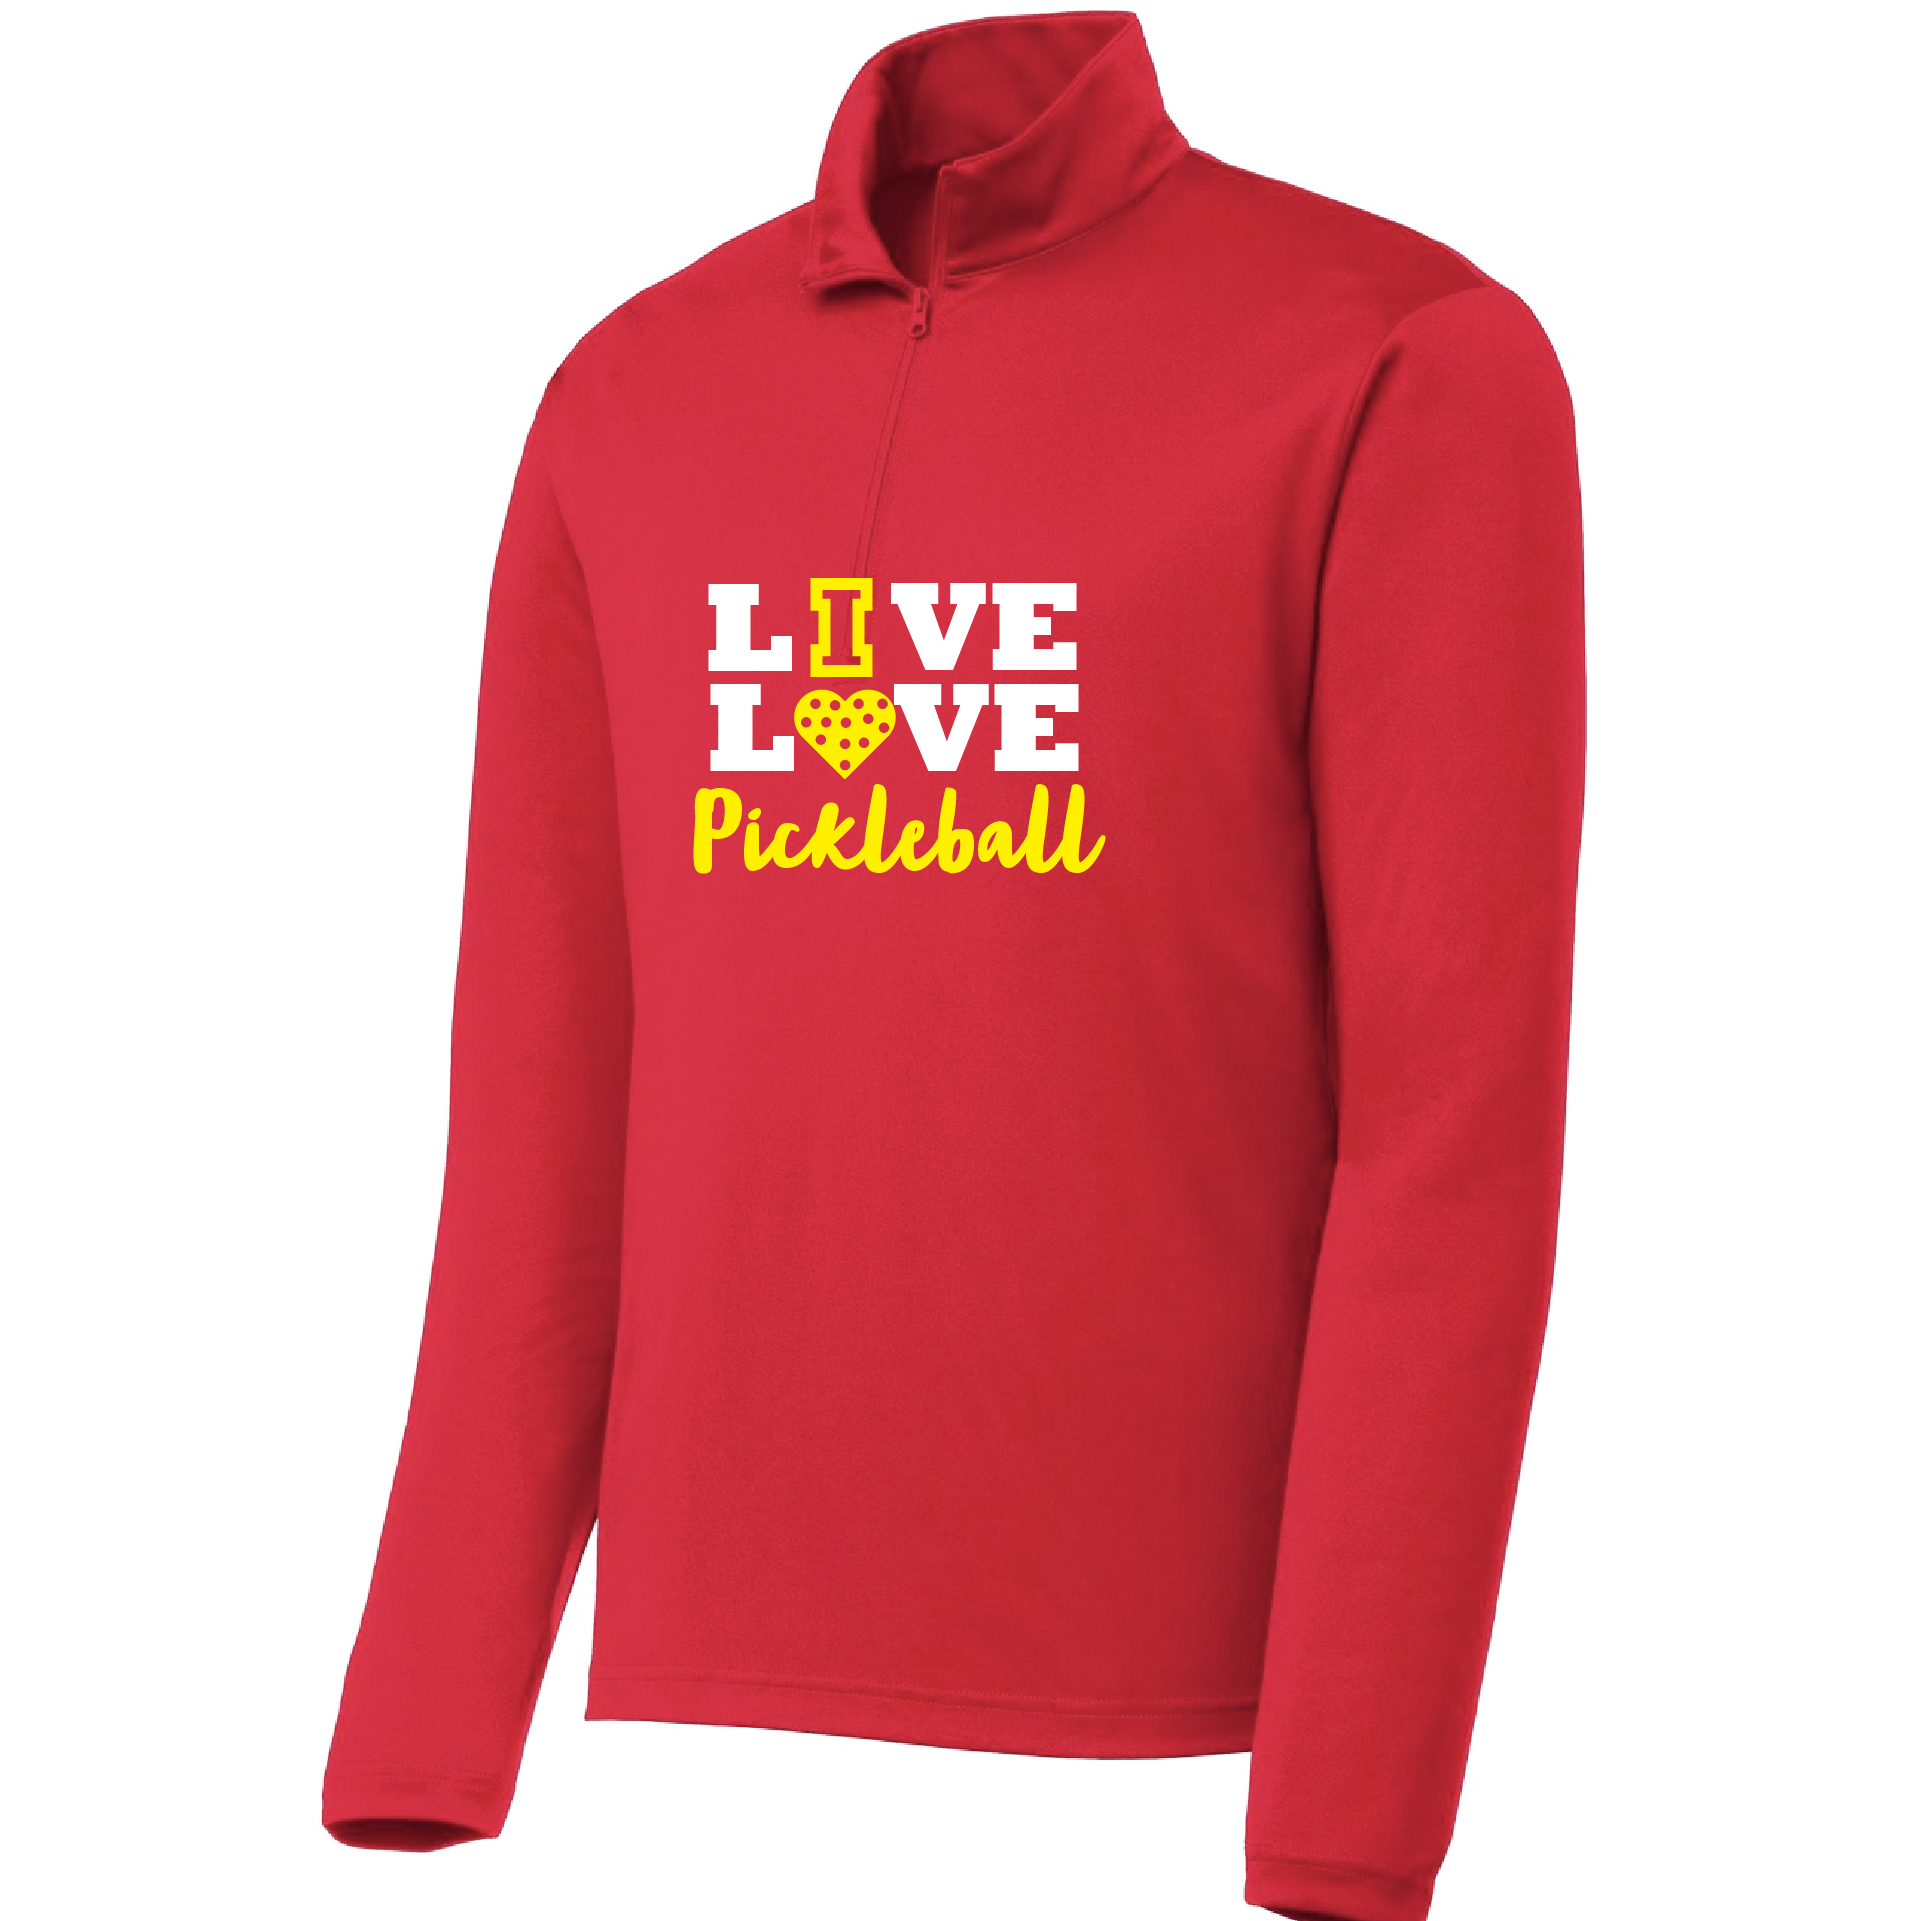 Pickleball Design: Live Love Pickleball  Men's 1/4-Zip Pullover  Turn up the volume in this Men's shirt with its perfect mix of softness and attitude. Material is ultra-comfortable with moisture wicking properties and tri-blend softness. PosiCharge technology locks in color. Highly breathable and lightweight. Versatile enough for wearing year-round.